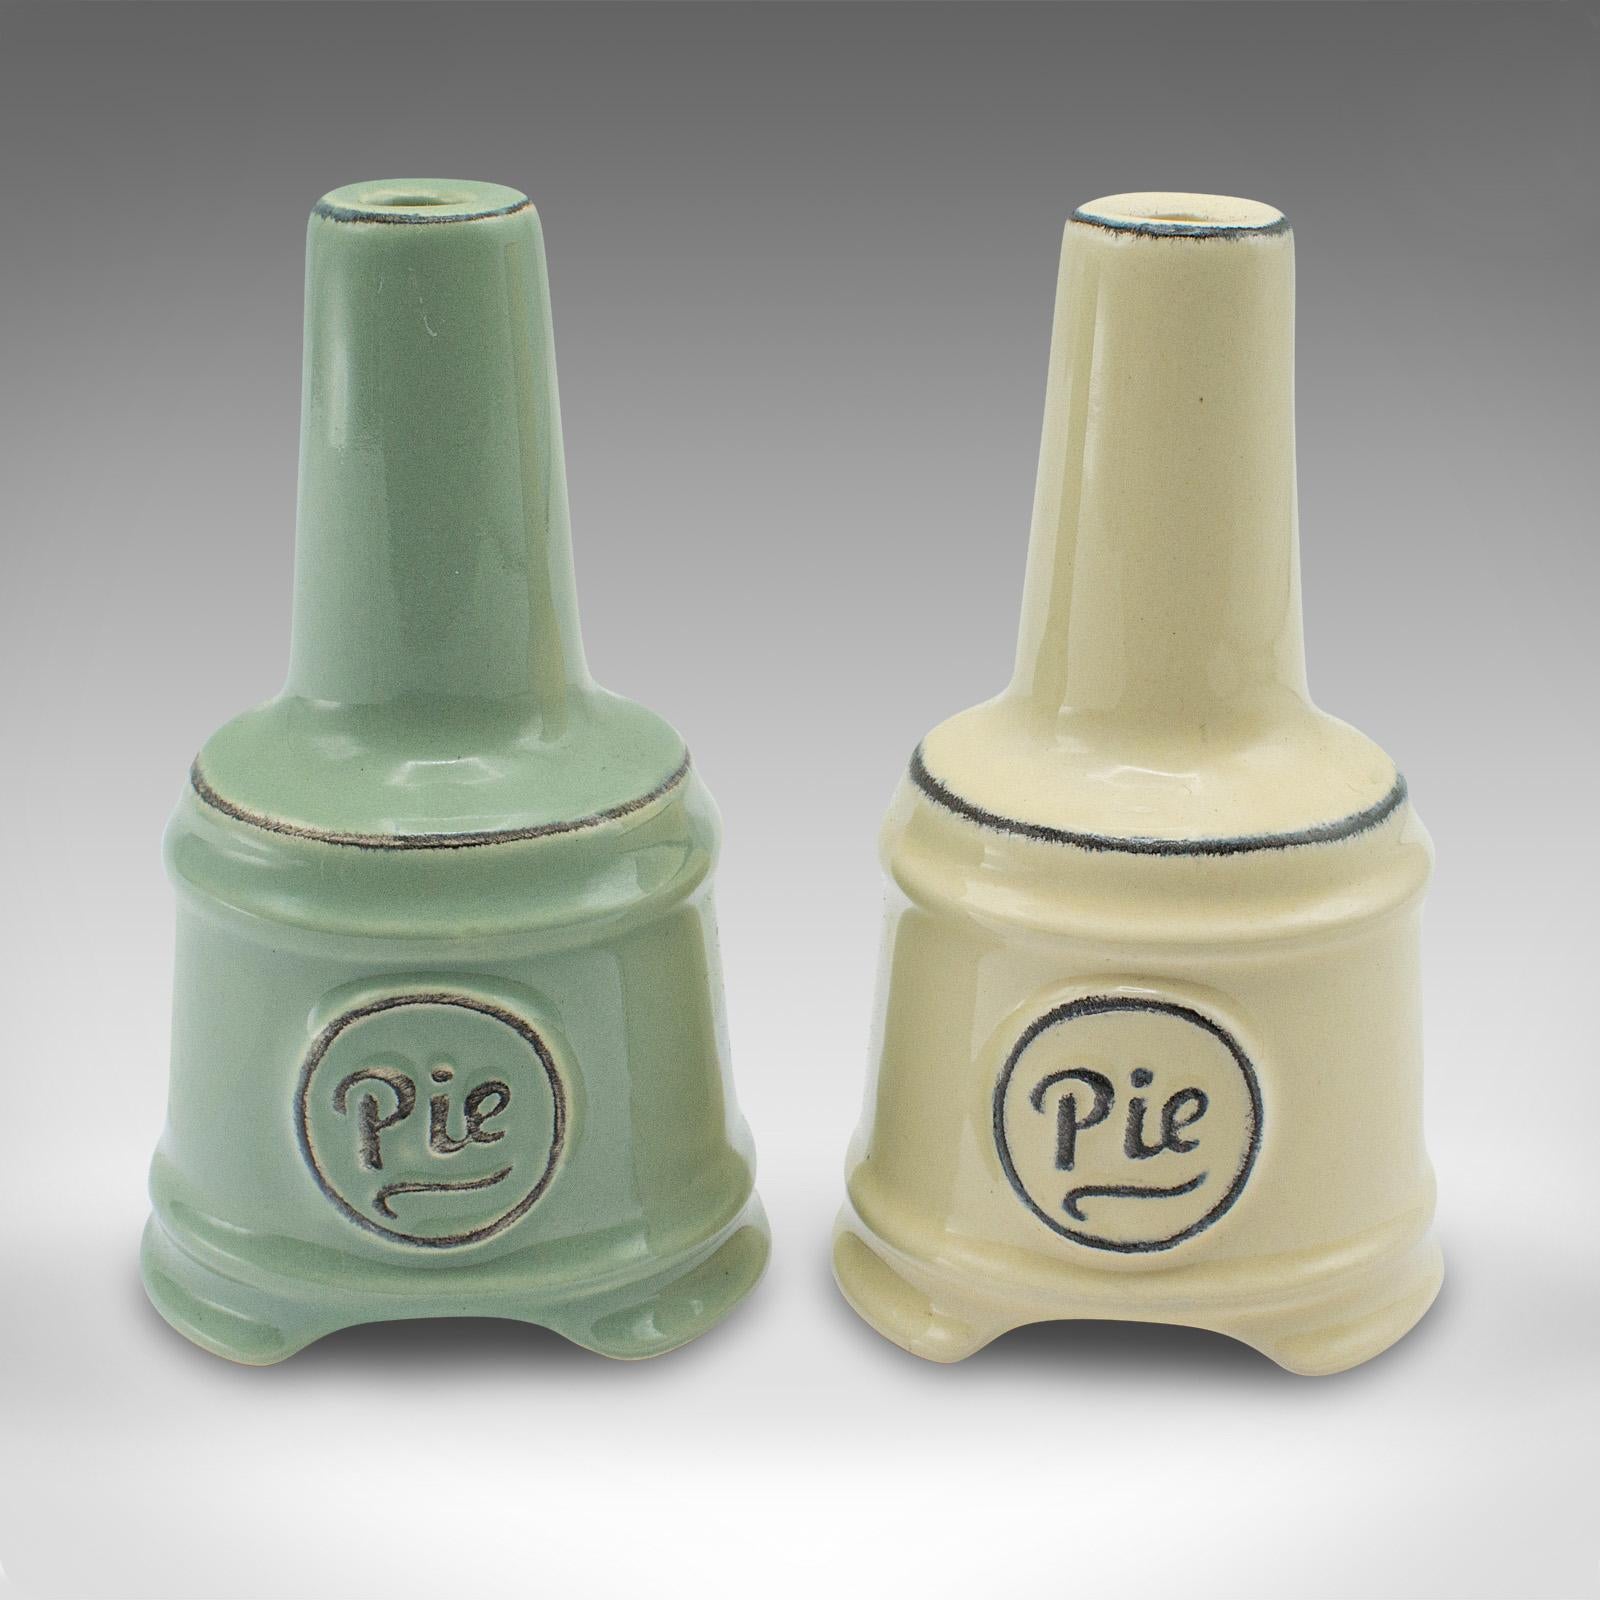 
This is a pair of vintage pie funnels. An English, ceramic bakery steam vent, dating to the mid 20th century, circa 1960.

Charmingly colourful funnels with an appealing decorative finish
Displaying a desirable aged patina and in very good